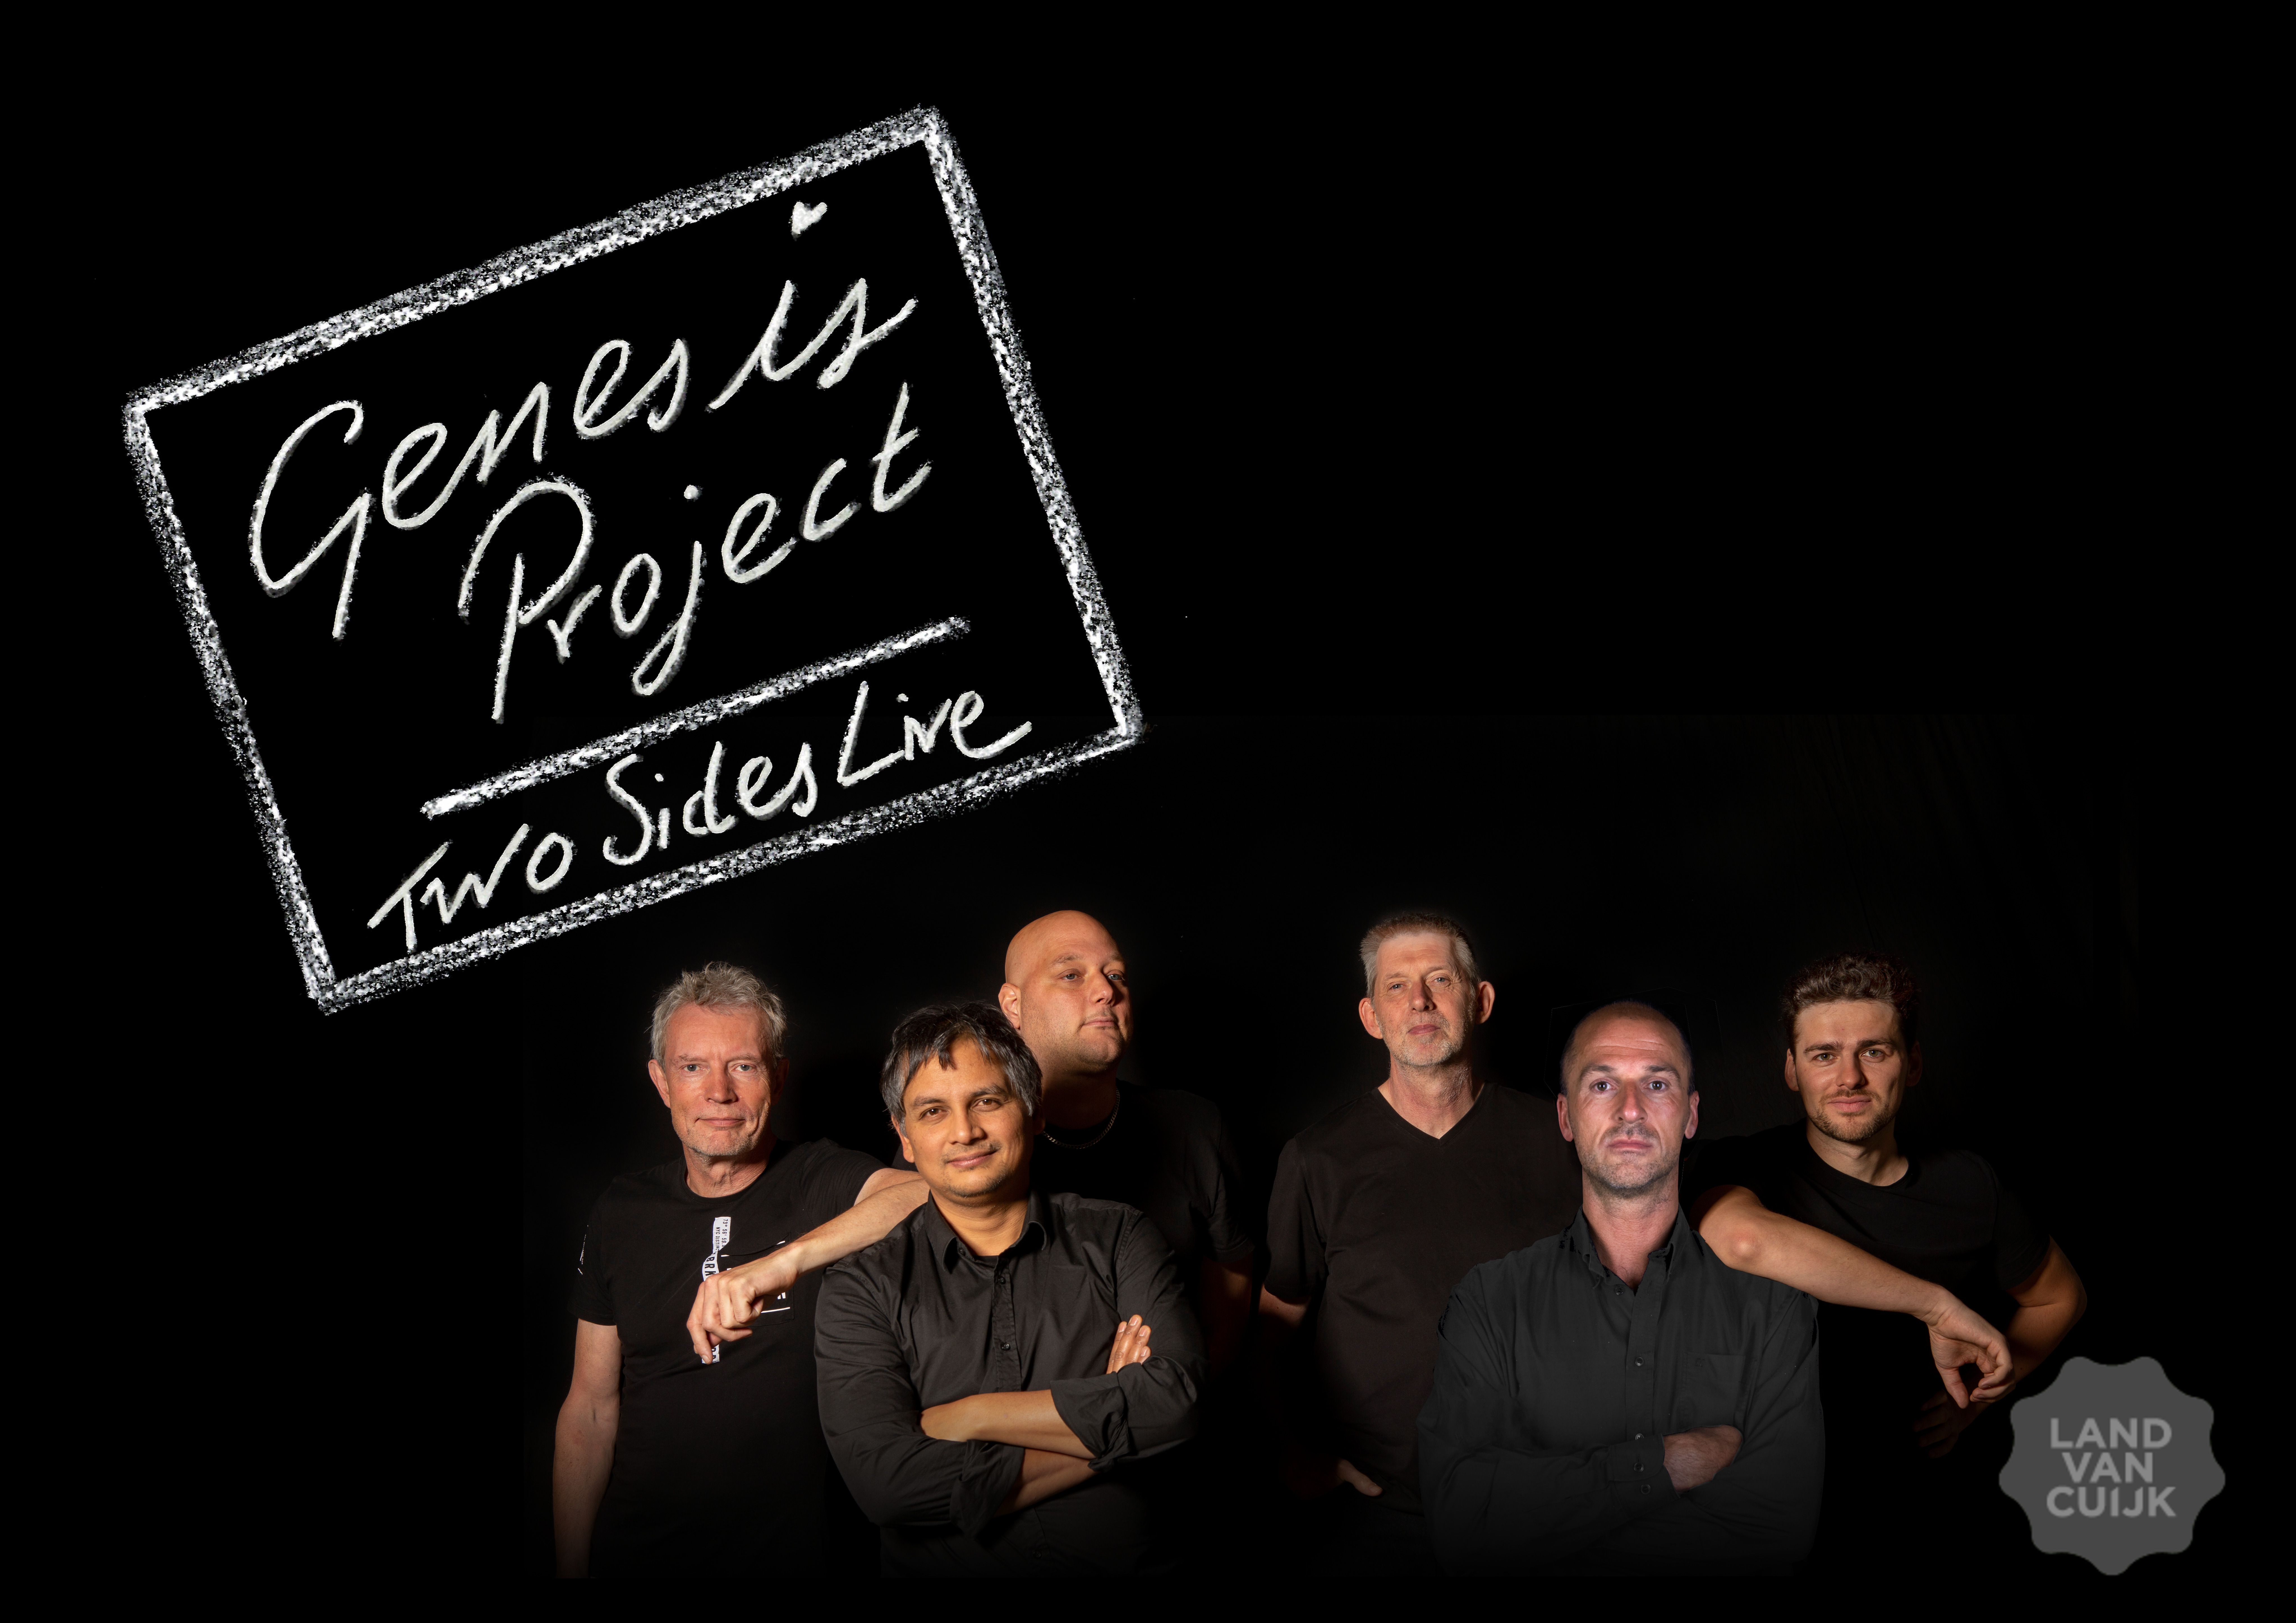 Genesis Project “Two Sides Live” in Theater Myllesweerd